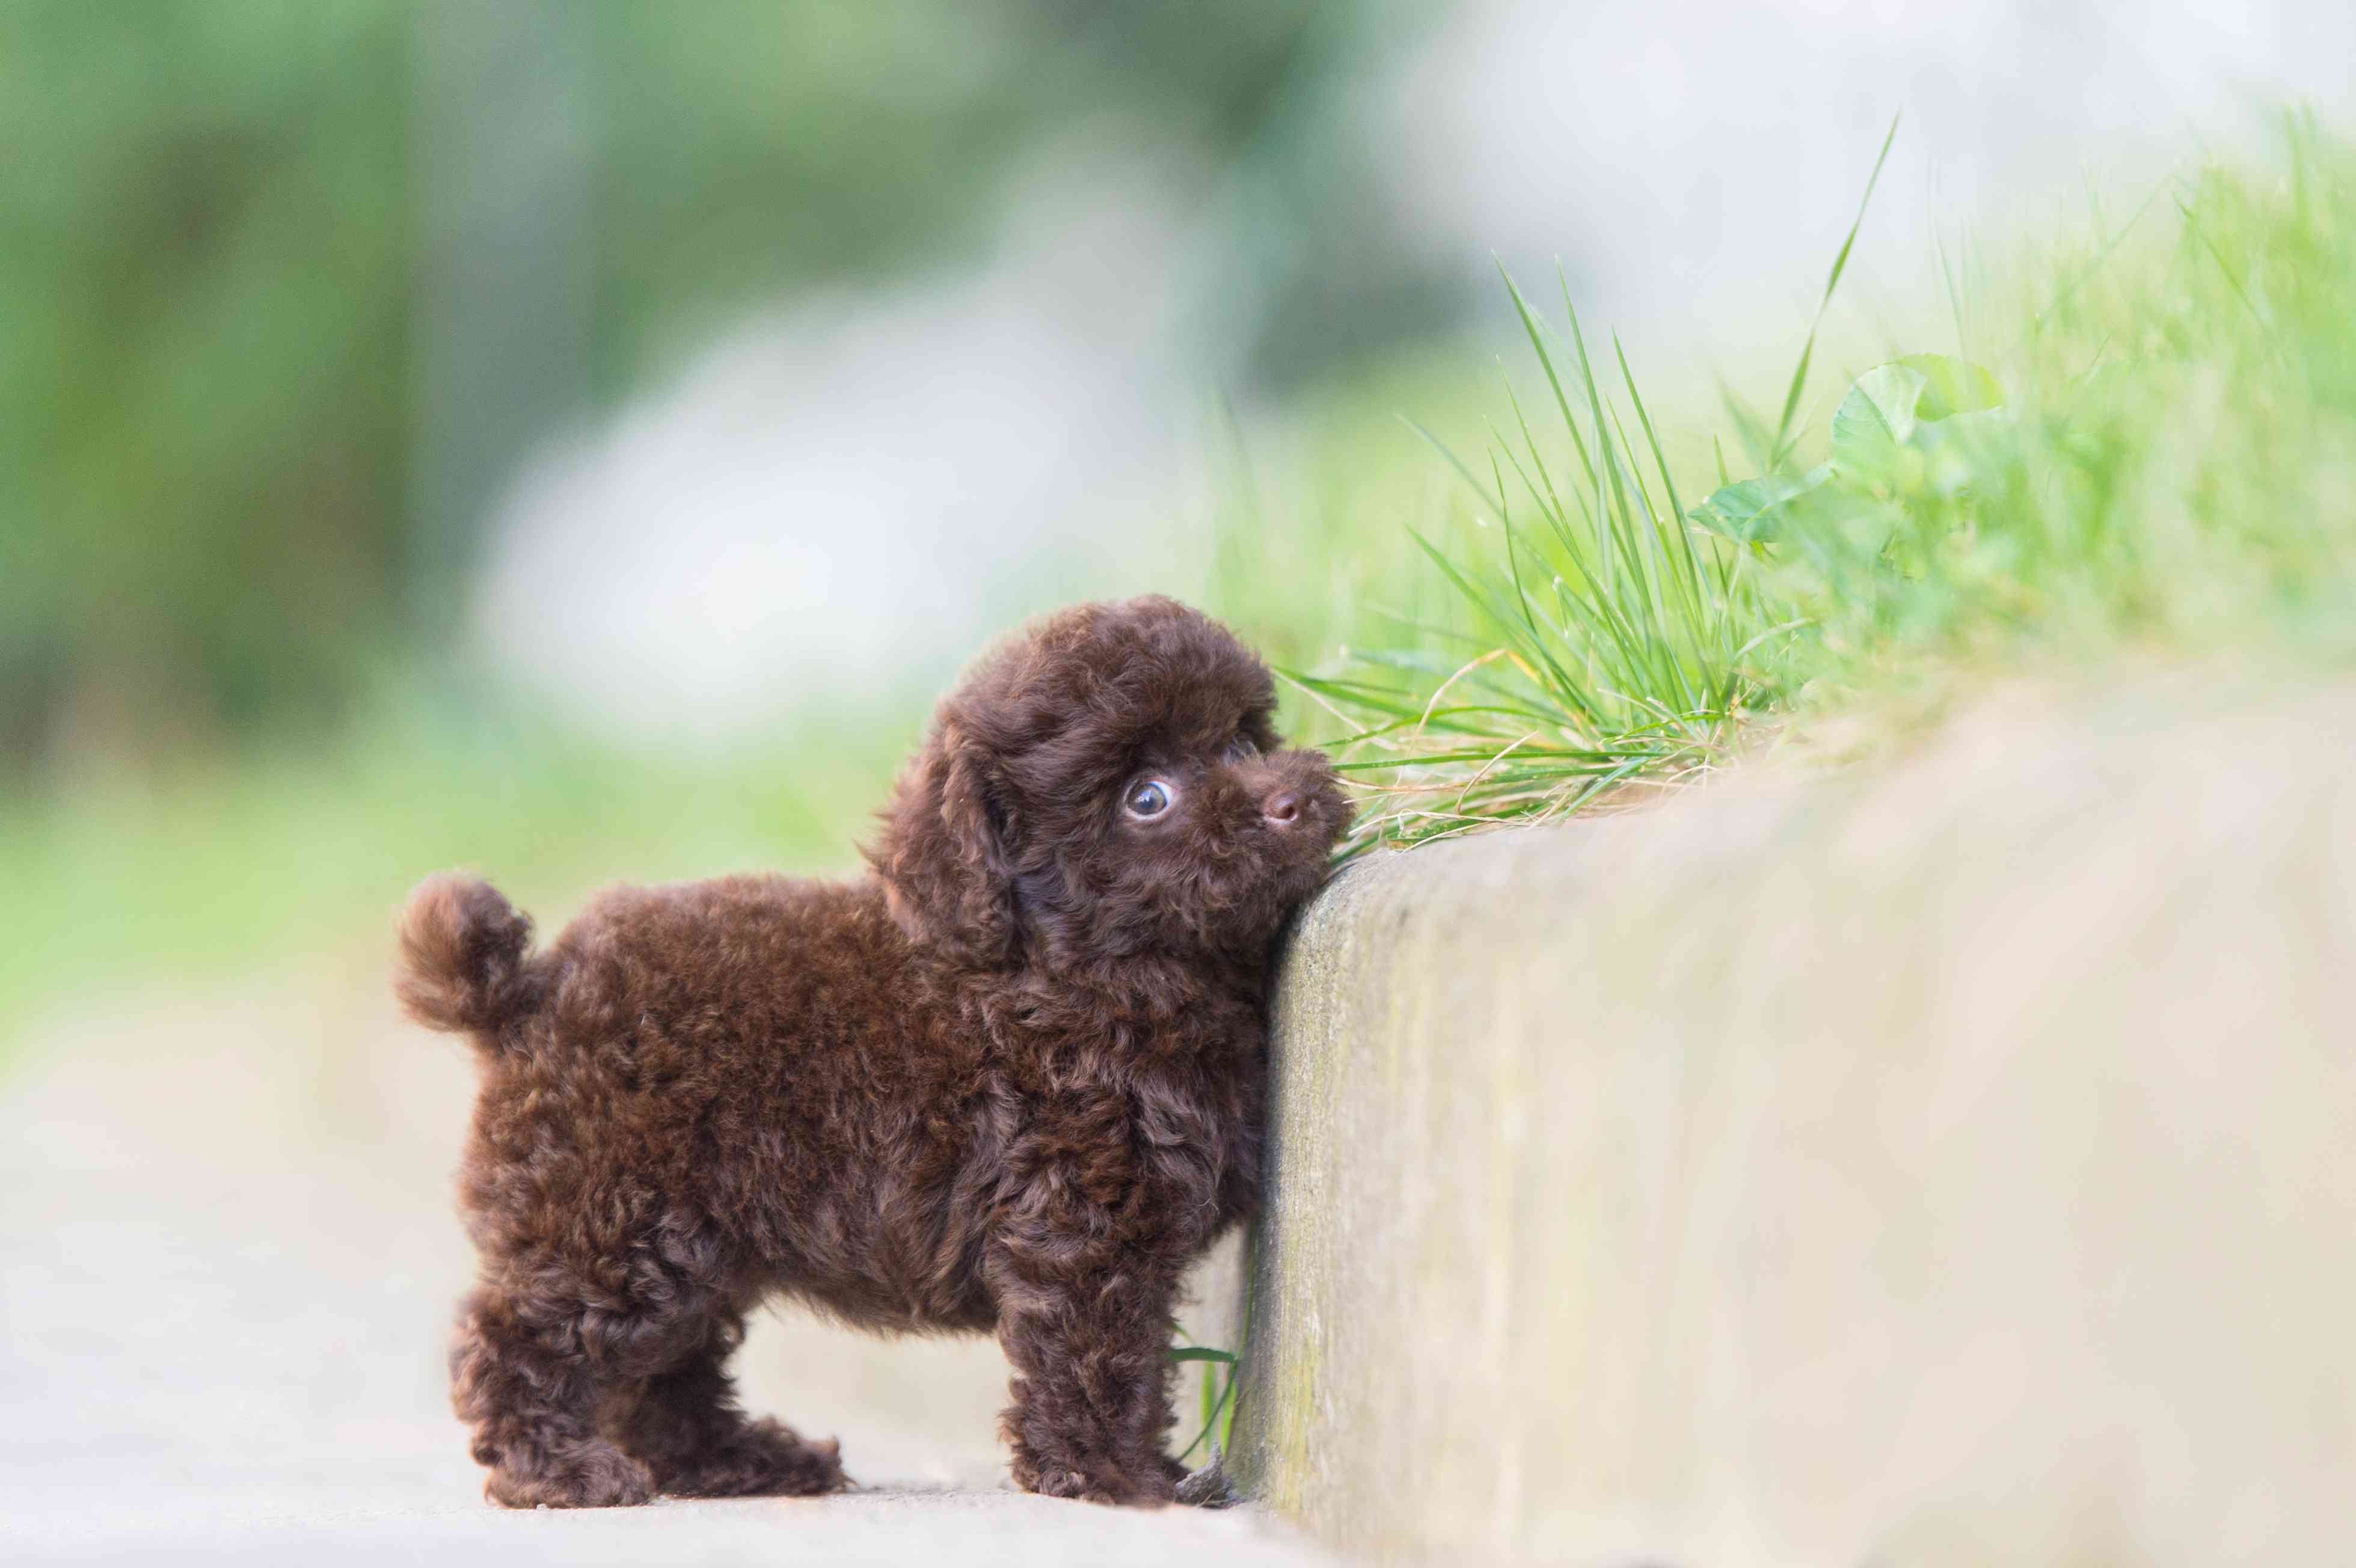 A tiny dark brown Toy Poodle puppy next to a curb.